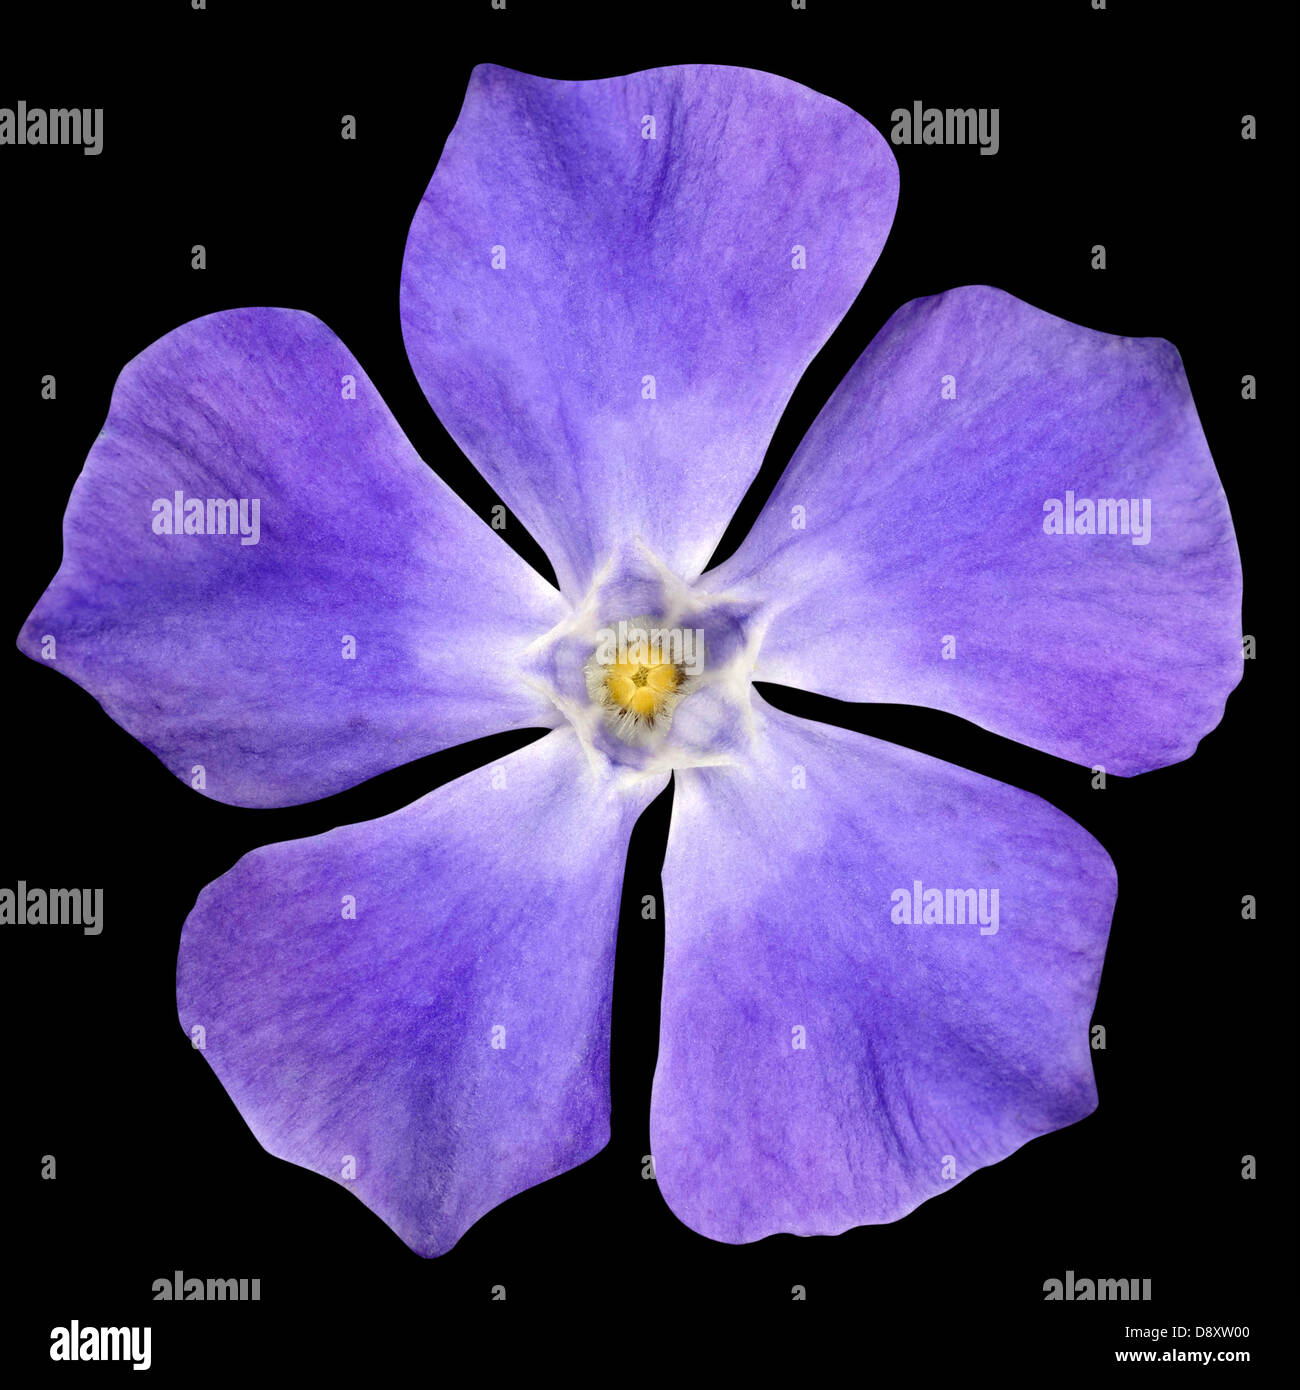 Periwinkle Flower Black Background High Resolution Stock Photography And Images Alamy